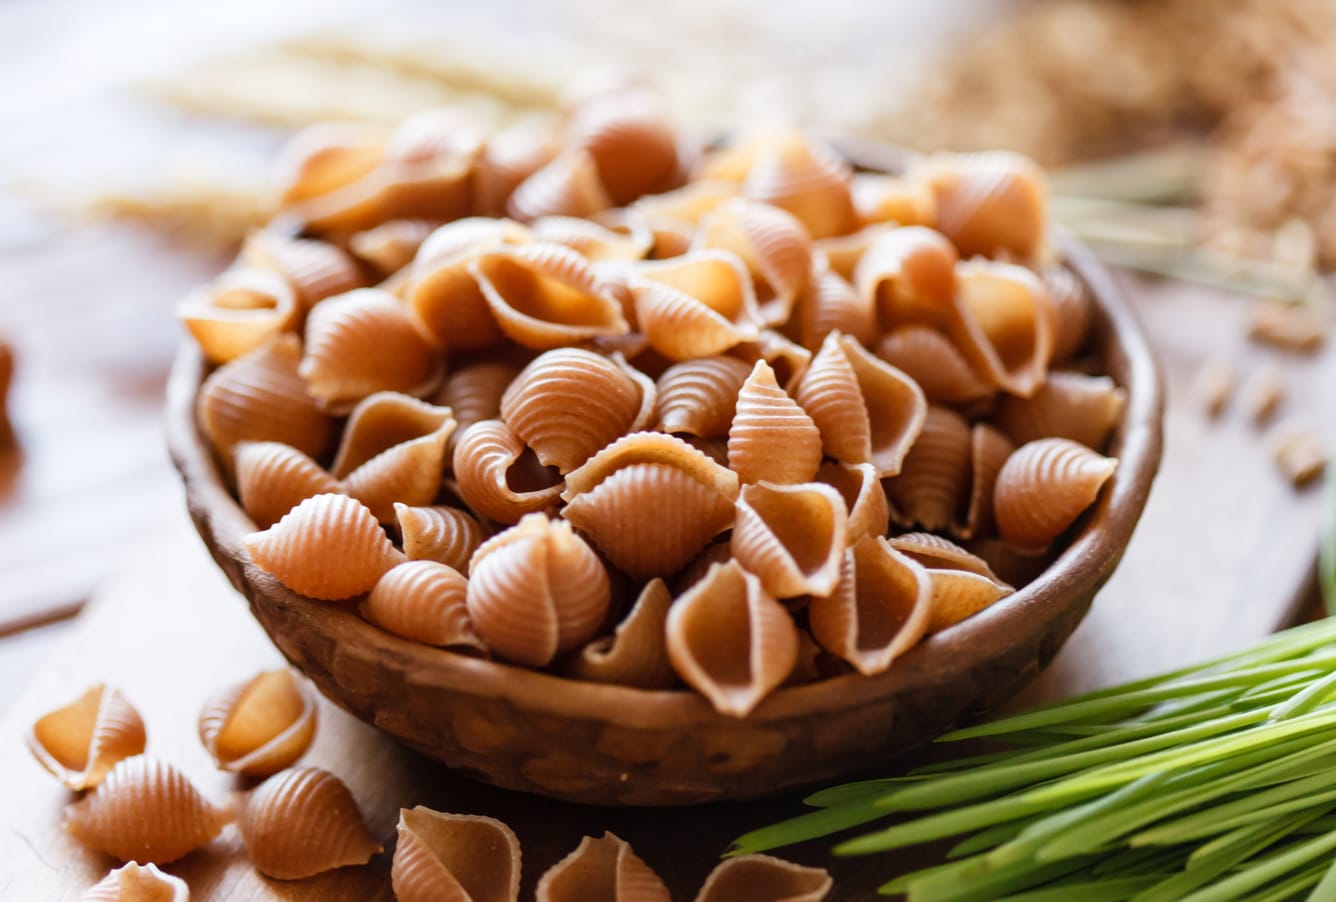 Wooden bowl of whole pasta.